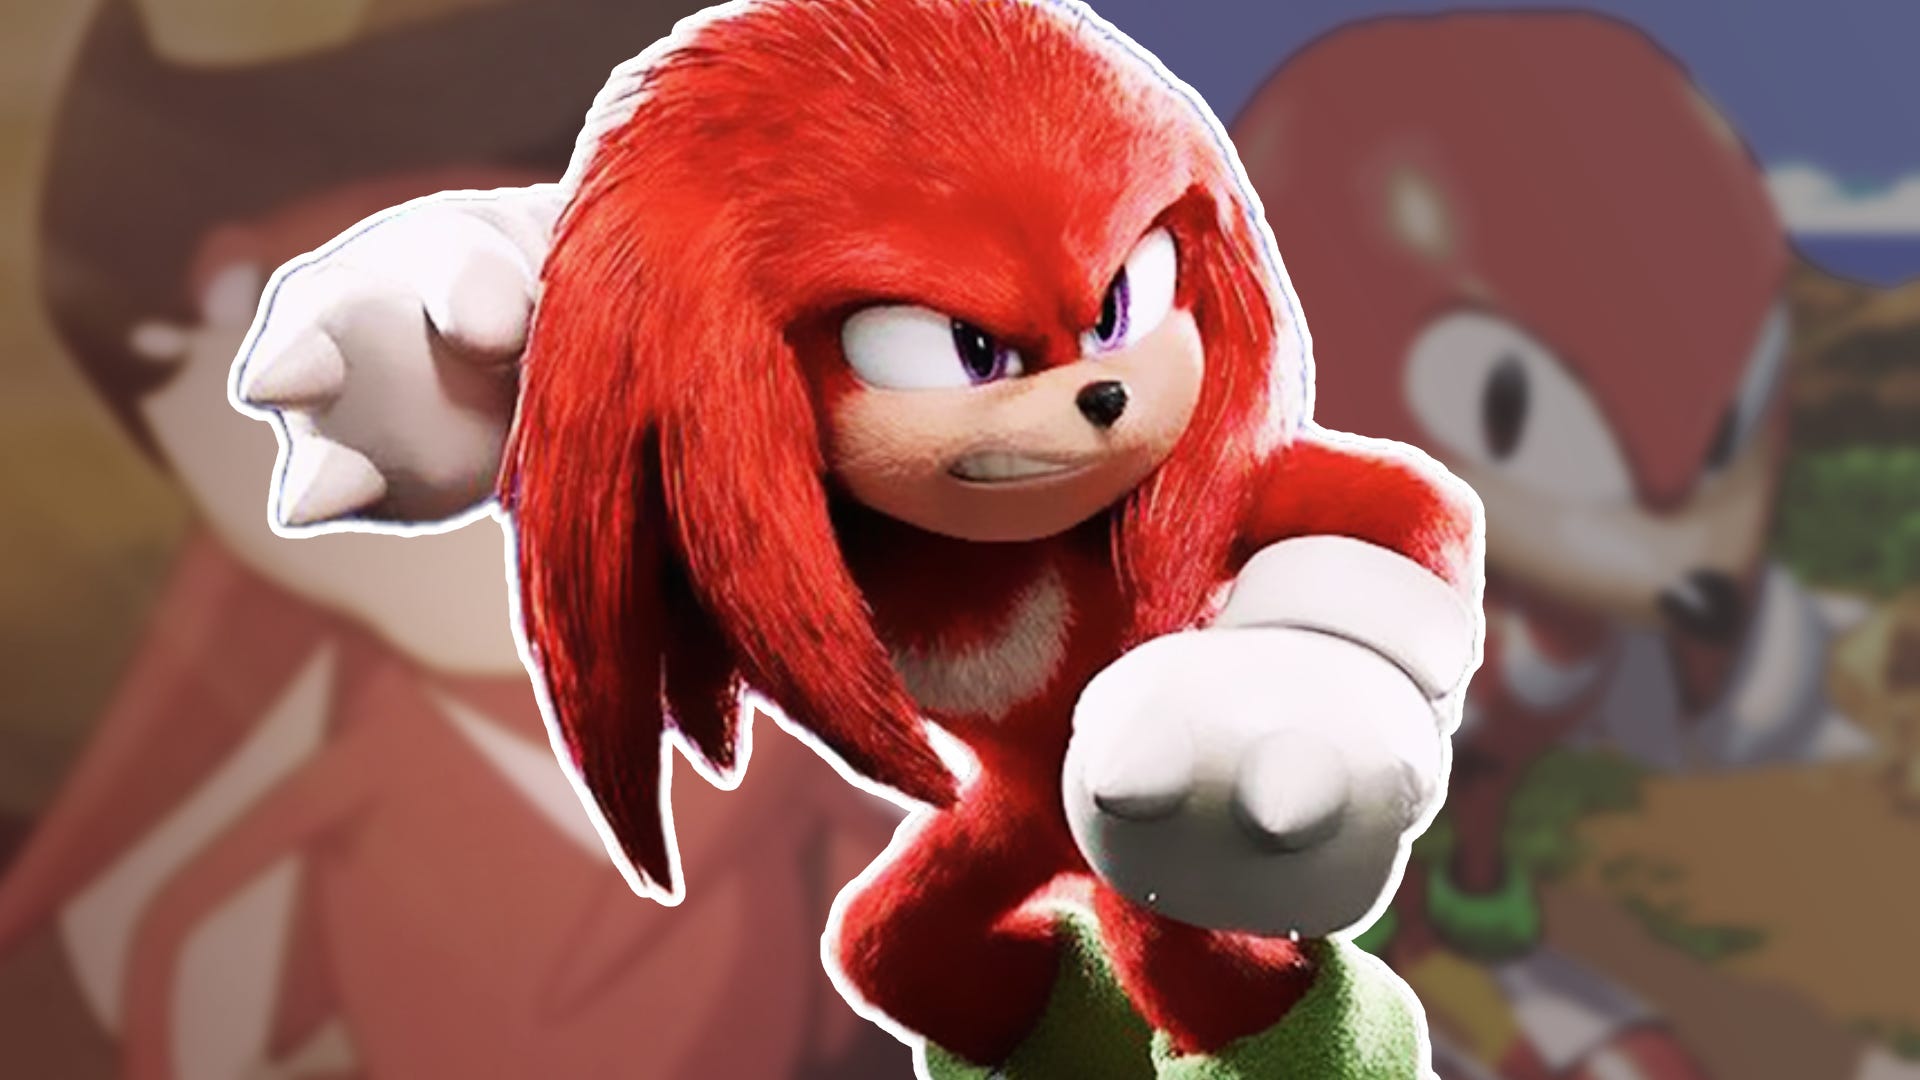 Knuckles follows a long-standing tradition of baffling video game adaptations, but I can’t figure out if that’s a good thing or not